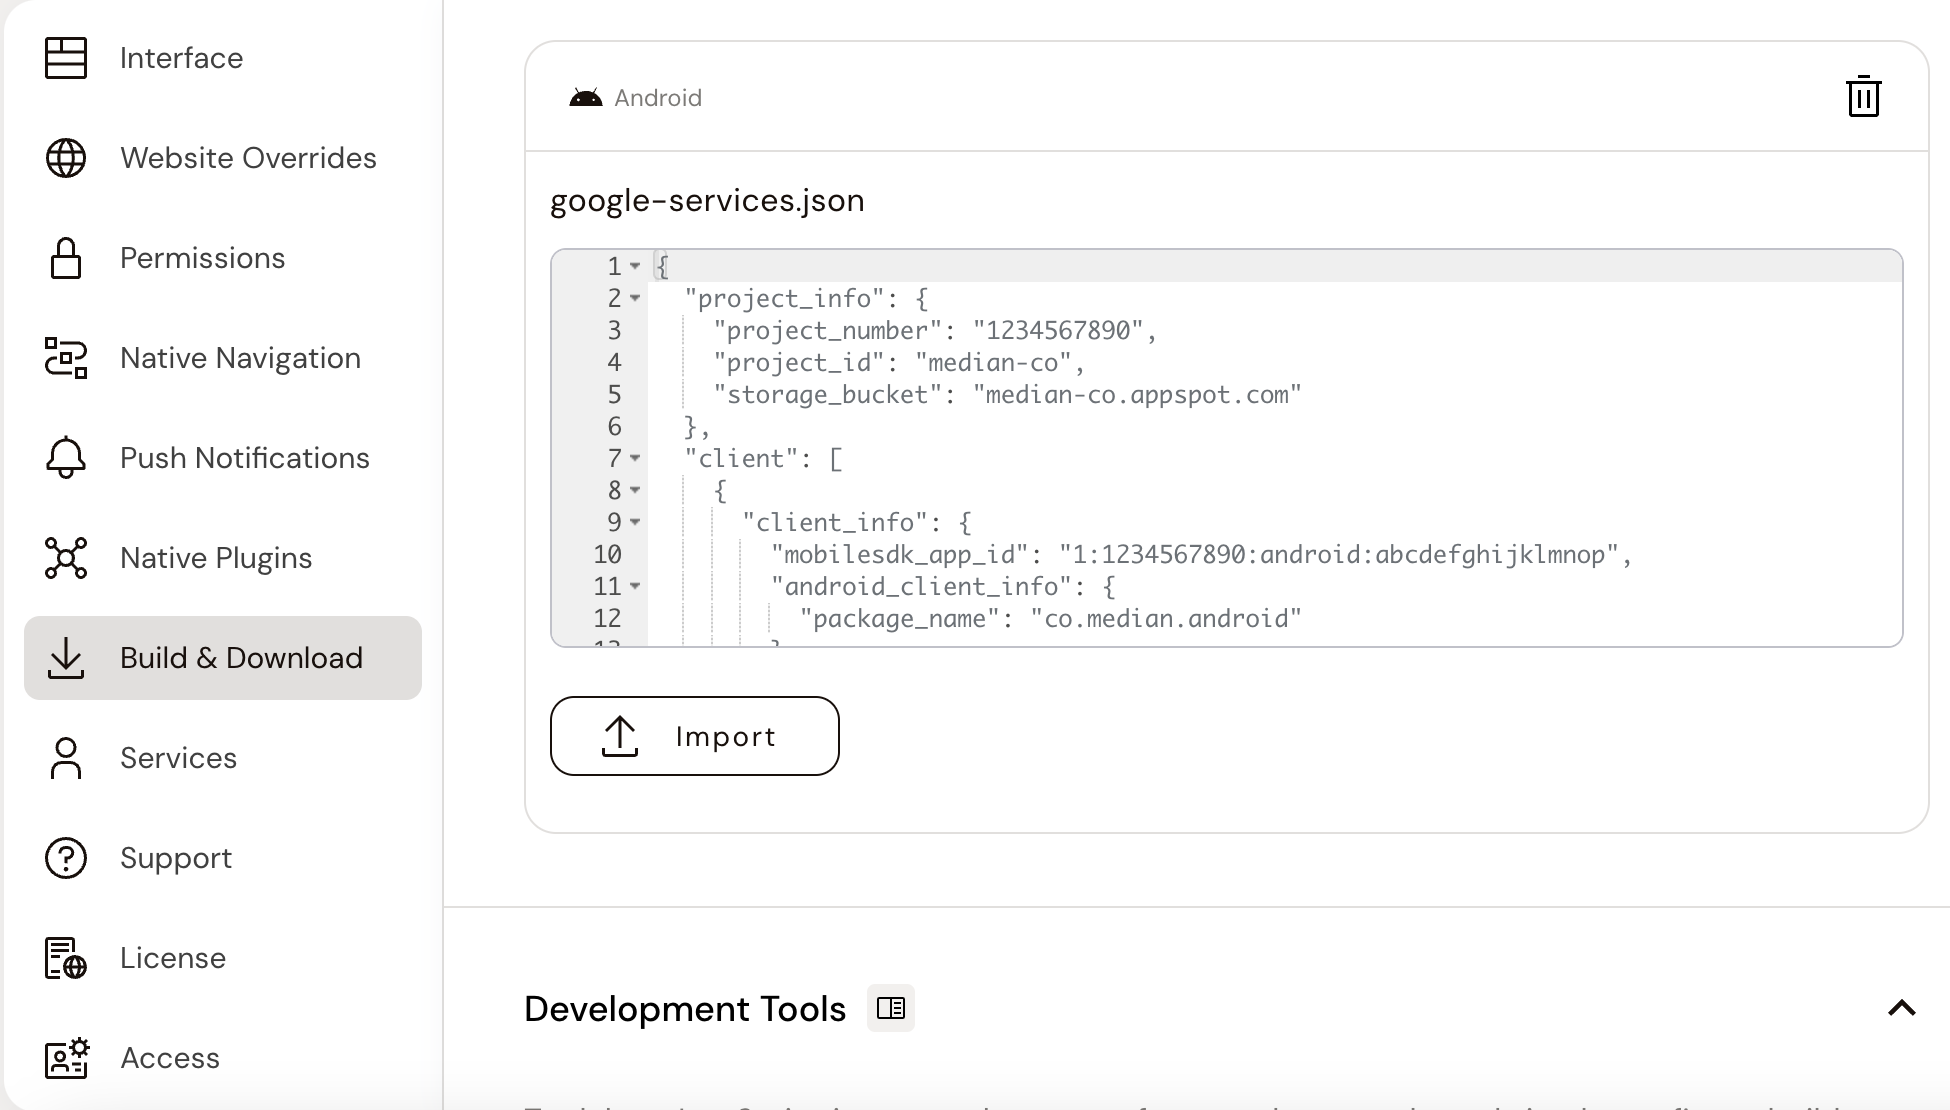 Figure 2: Android google-services.json for Firebase